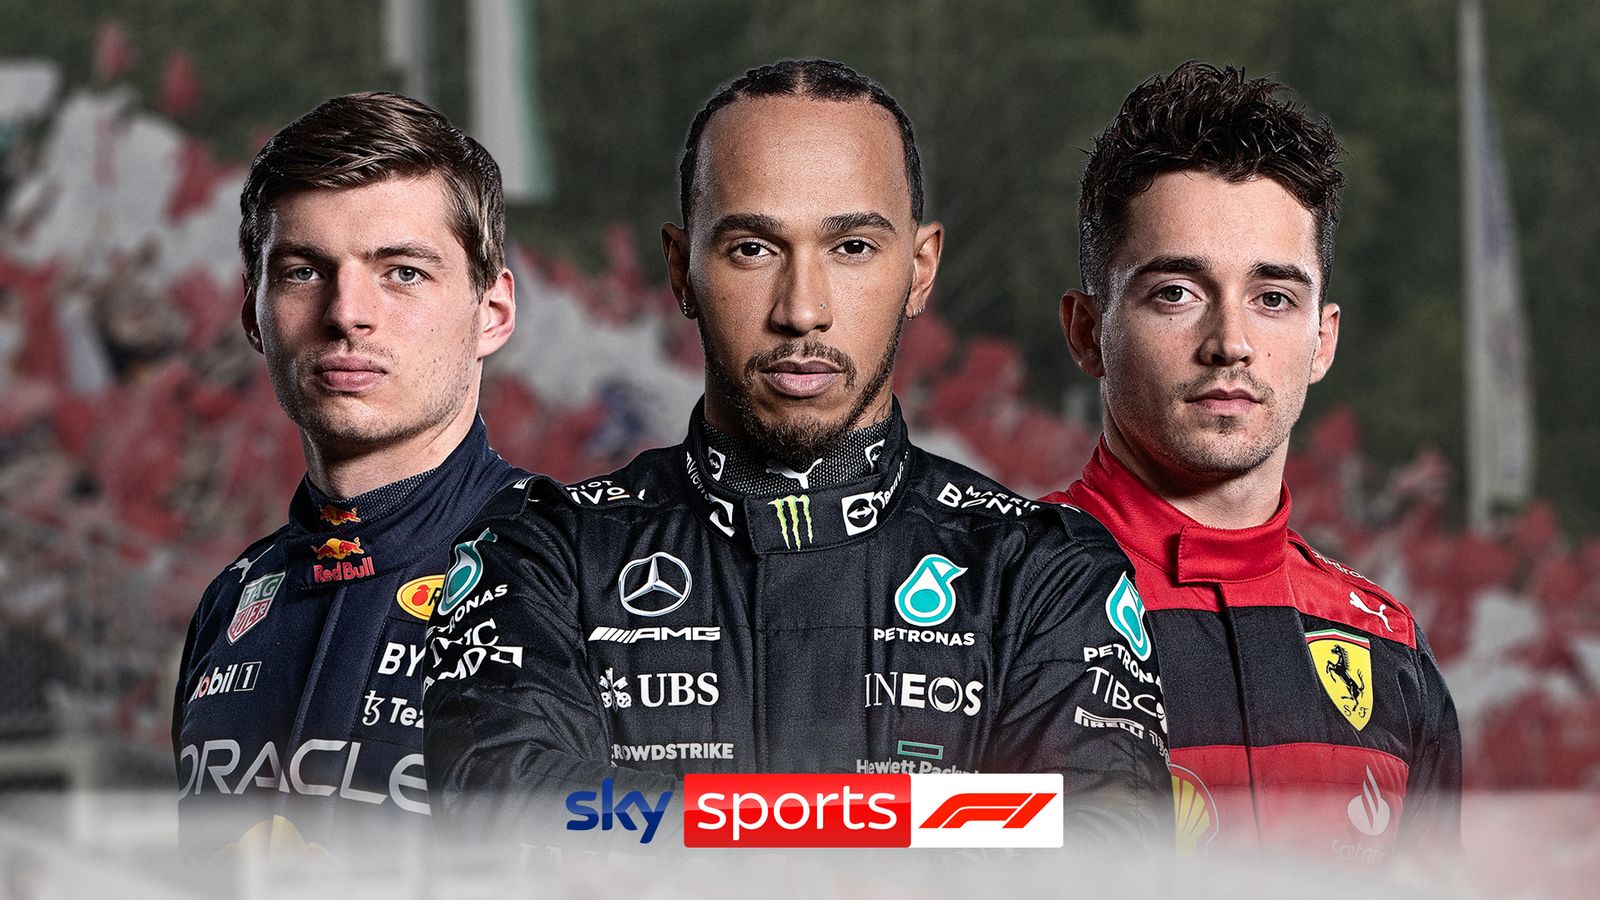 Austrian Grand Prix: When to watch practice, the Sprint, and the race live on Sky Sports F1